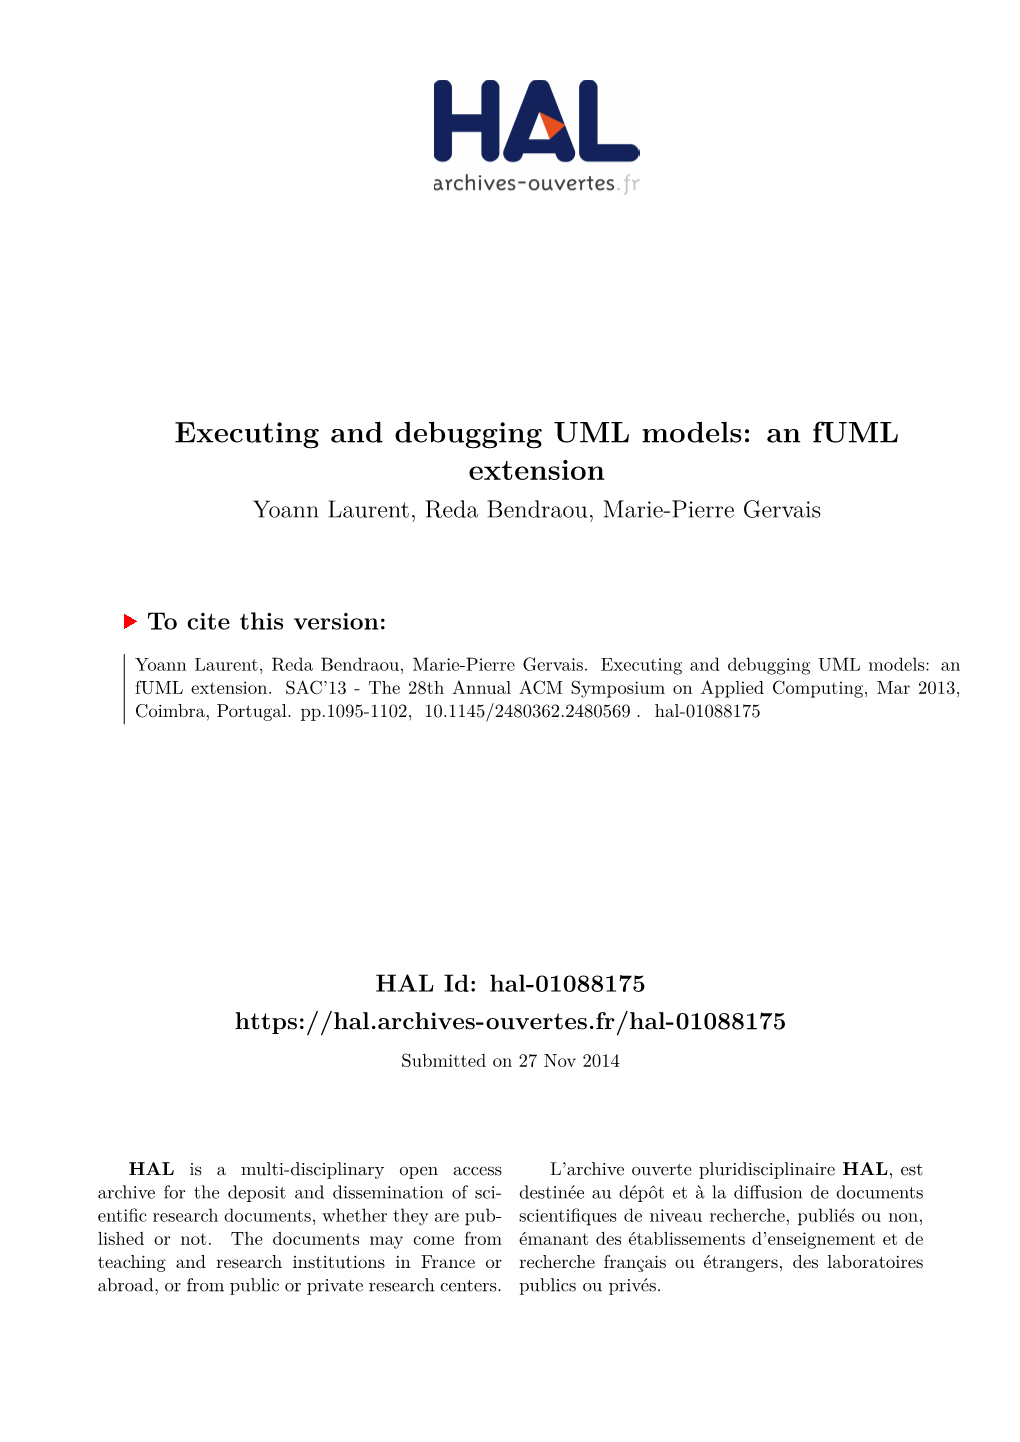 Executing and Debugging UML Models: an Fuml Extension Yoann Laurent, Reda Bendraou, Marie-Pierre Gervais